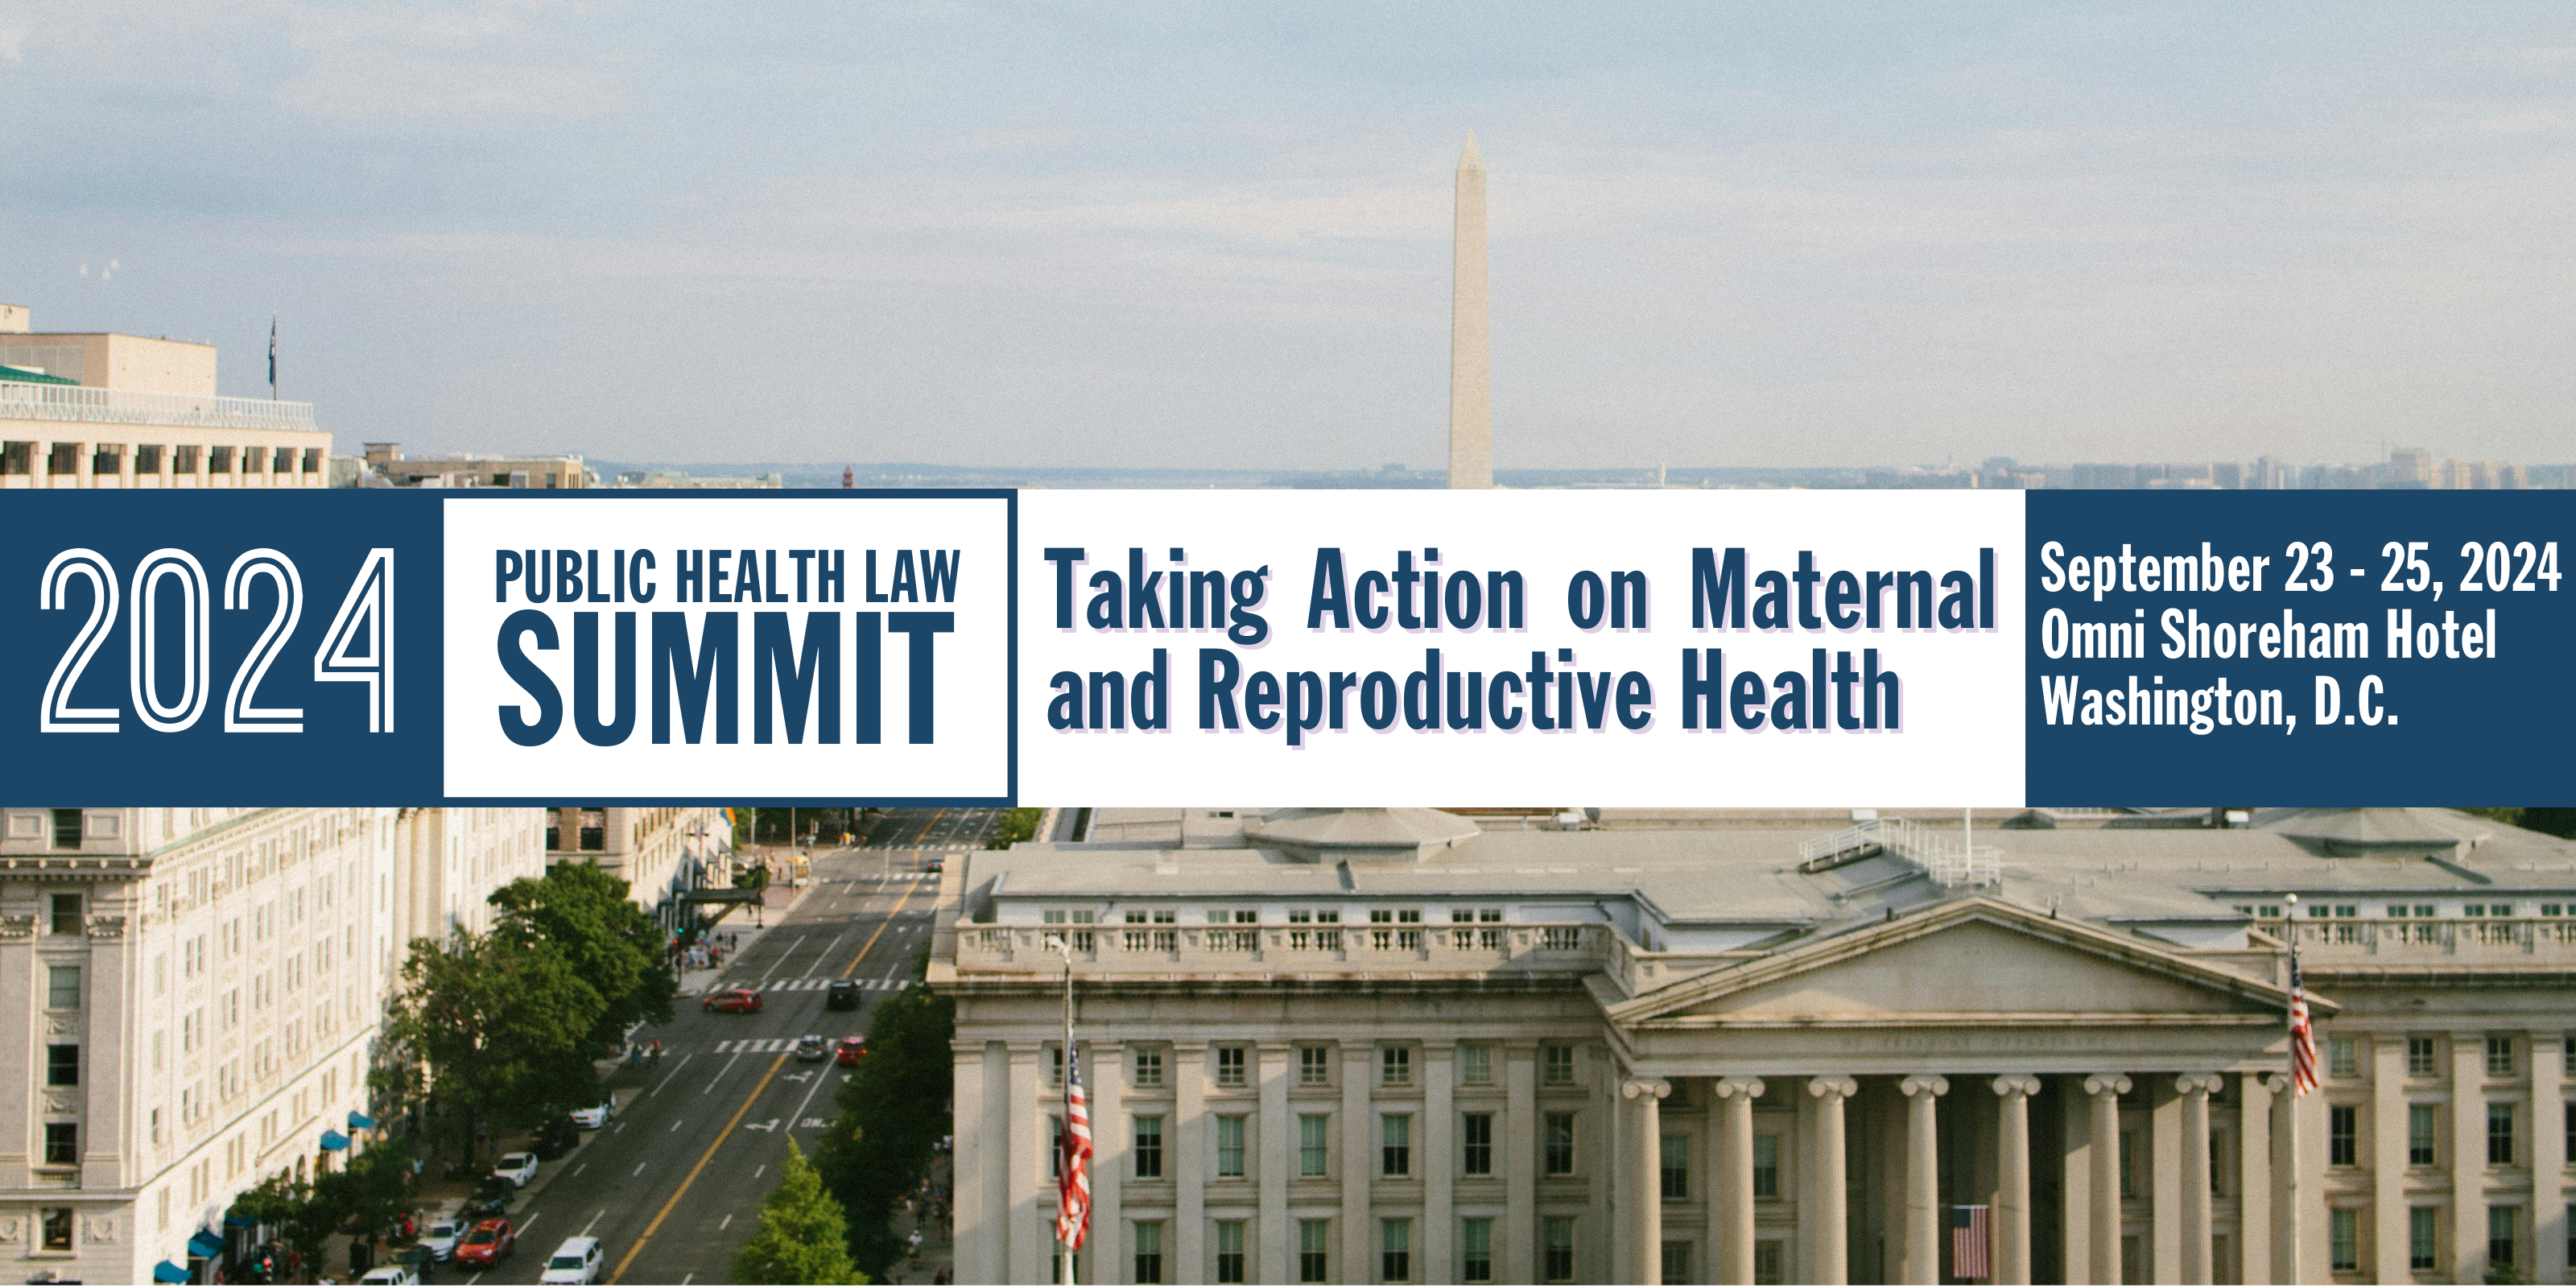 Graphic promoting the 2024 Public Health Law Summit. Taking Action on Maternal and Reproductive Health. September 23-25, 2024. Omni Shoreham Hotel Washington D.C.